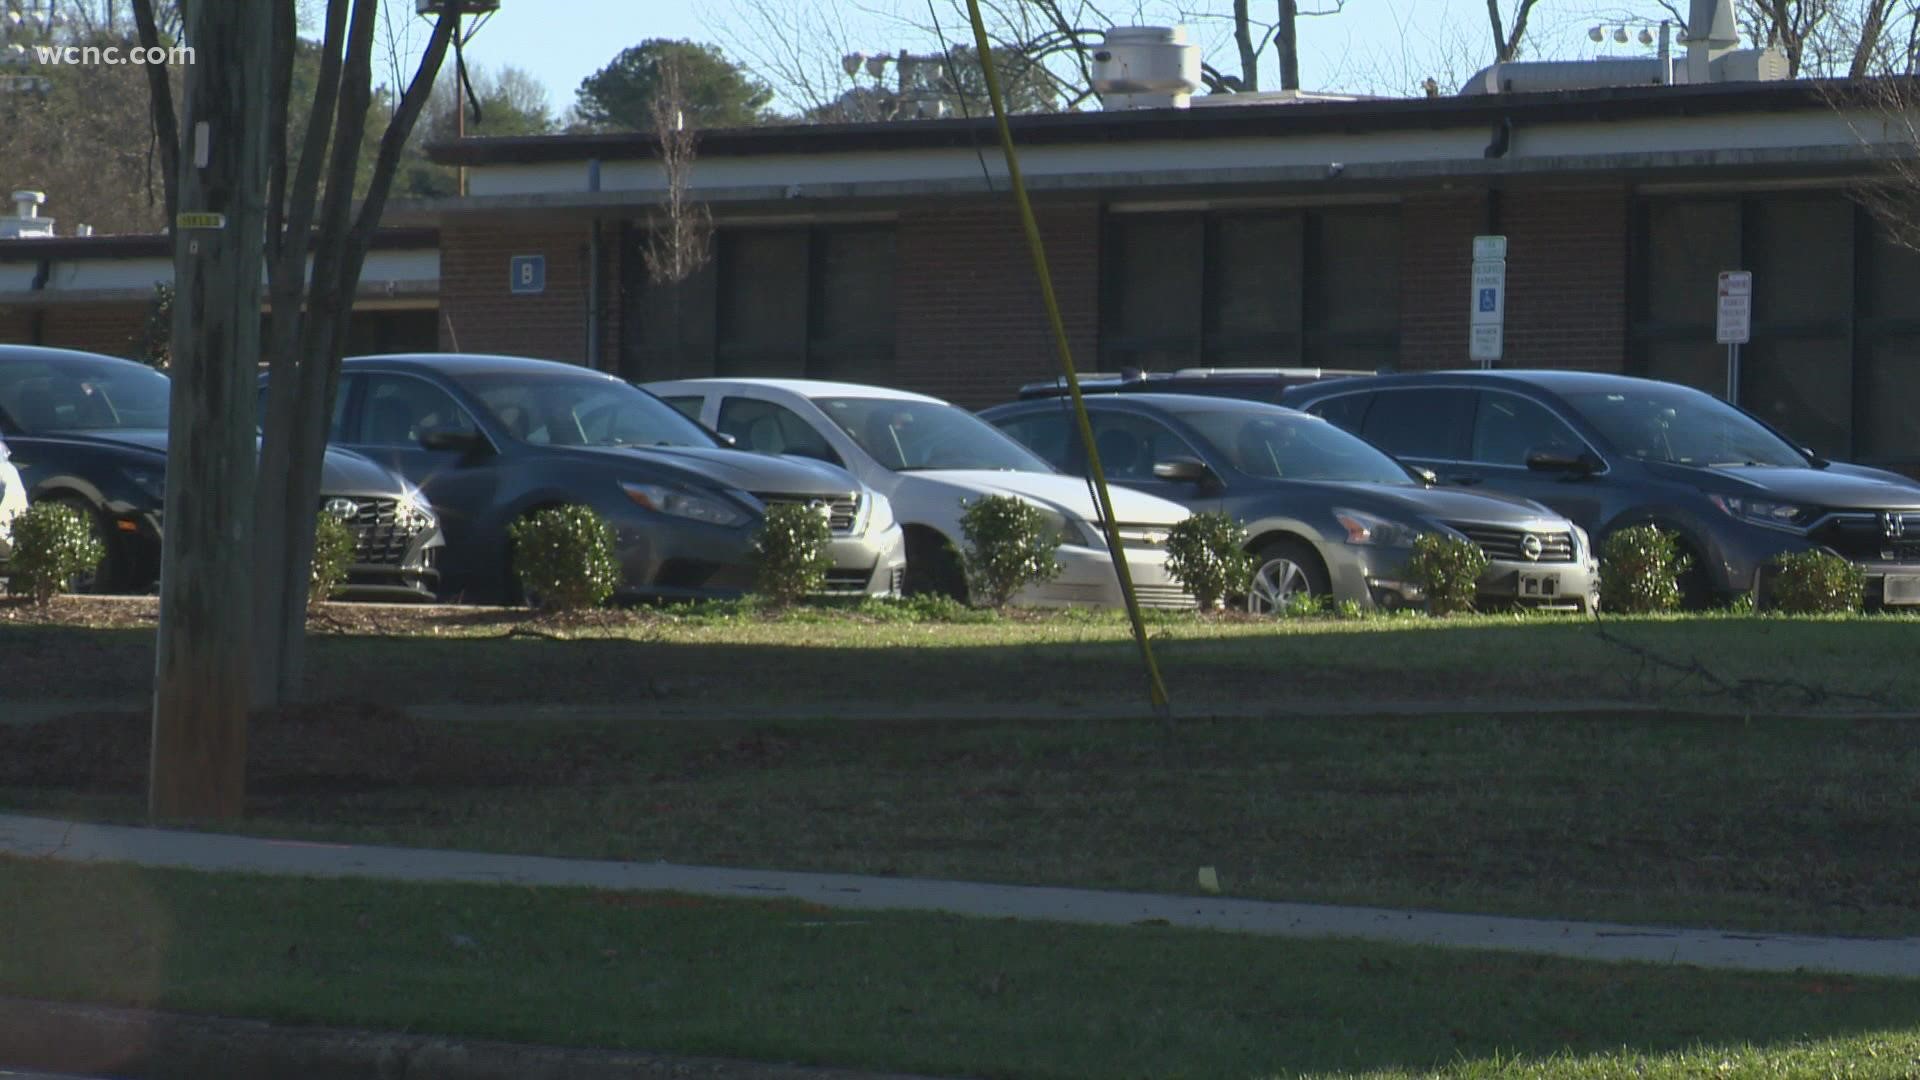 CMPD said they were called to school for reports of a fight involving several students.